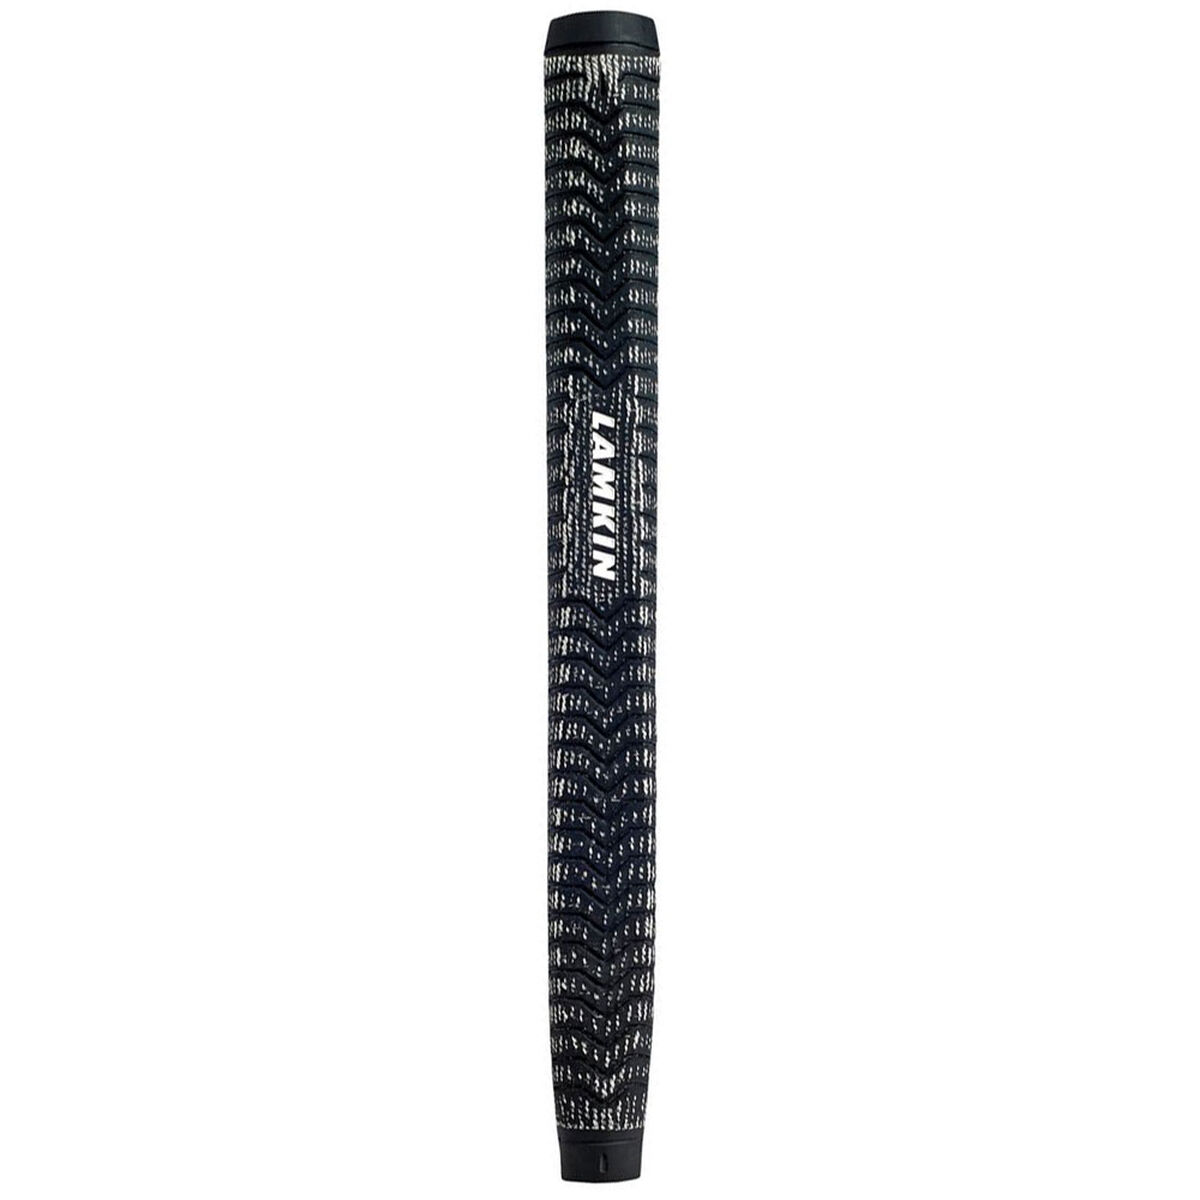 Lamkin Black and White Deep Etched Full Cord Paddle Golf Putter Grip | American Golf, One Size